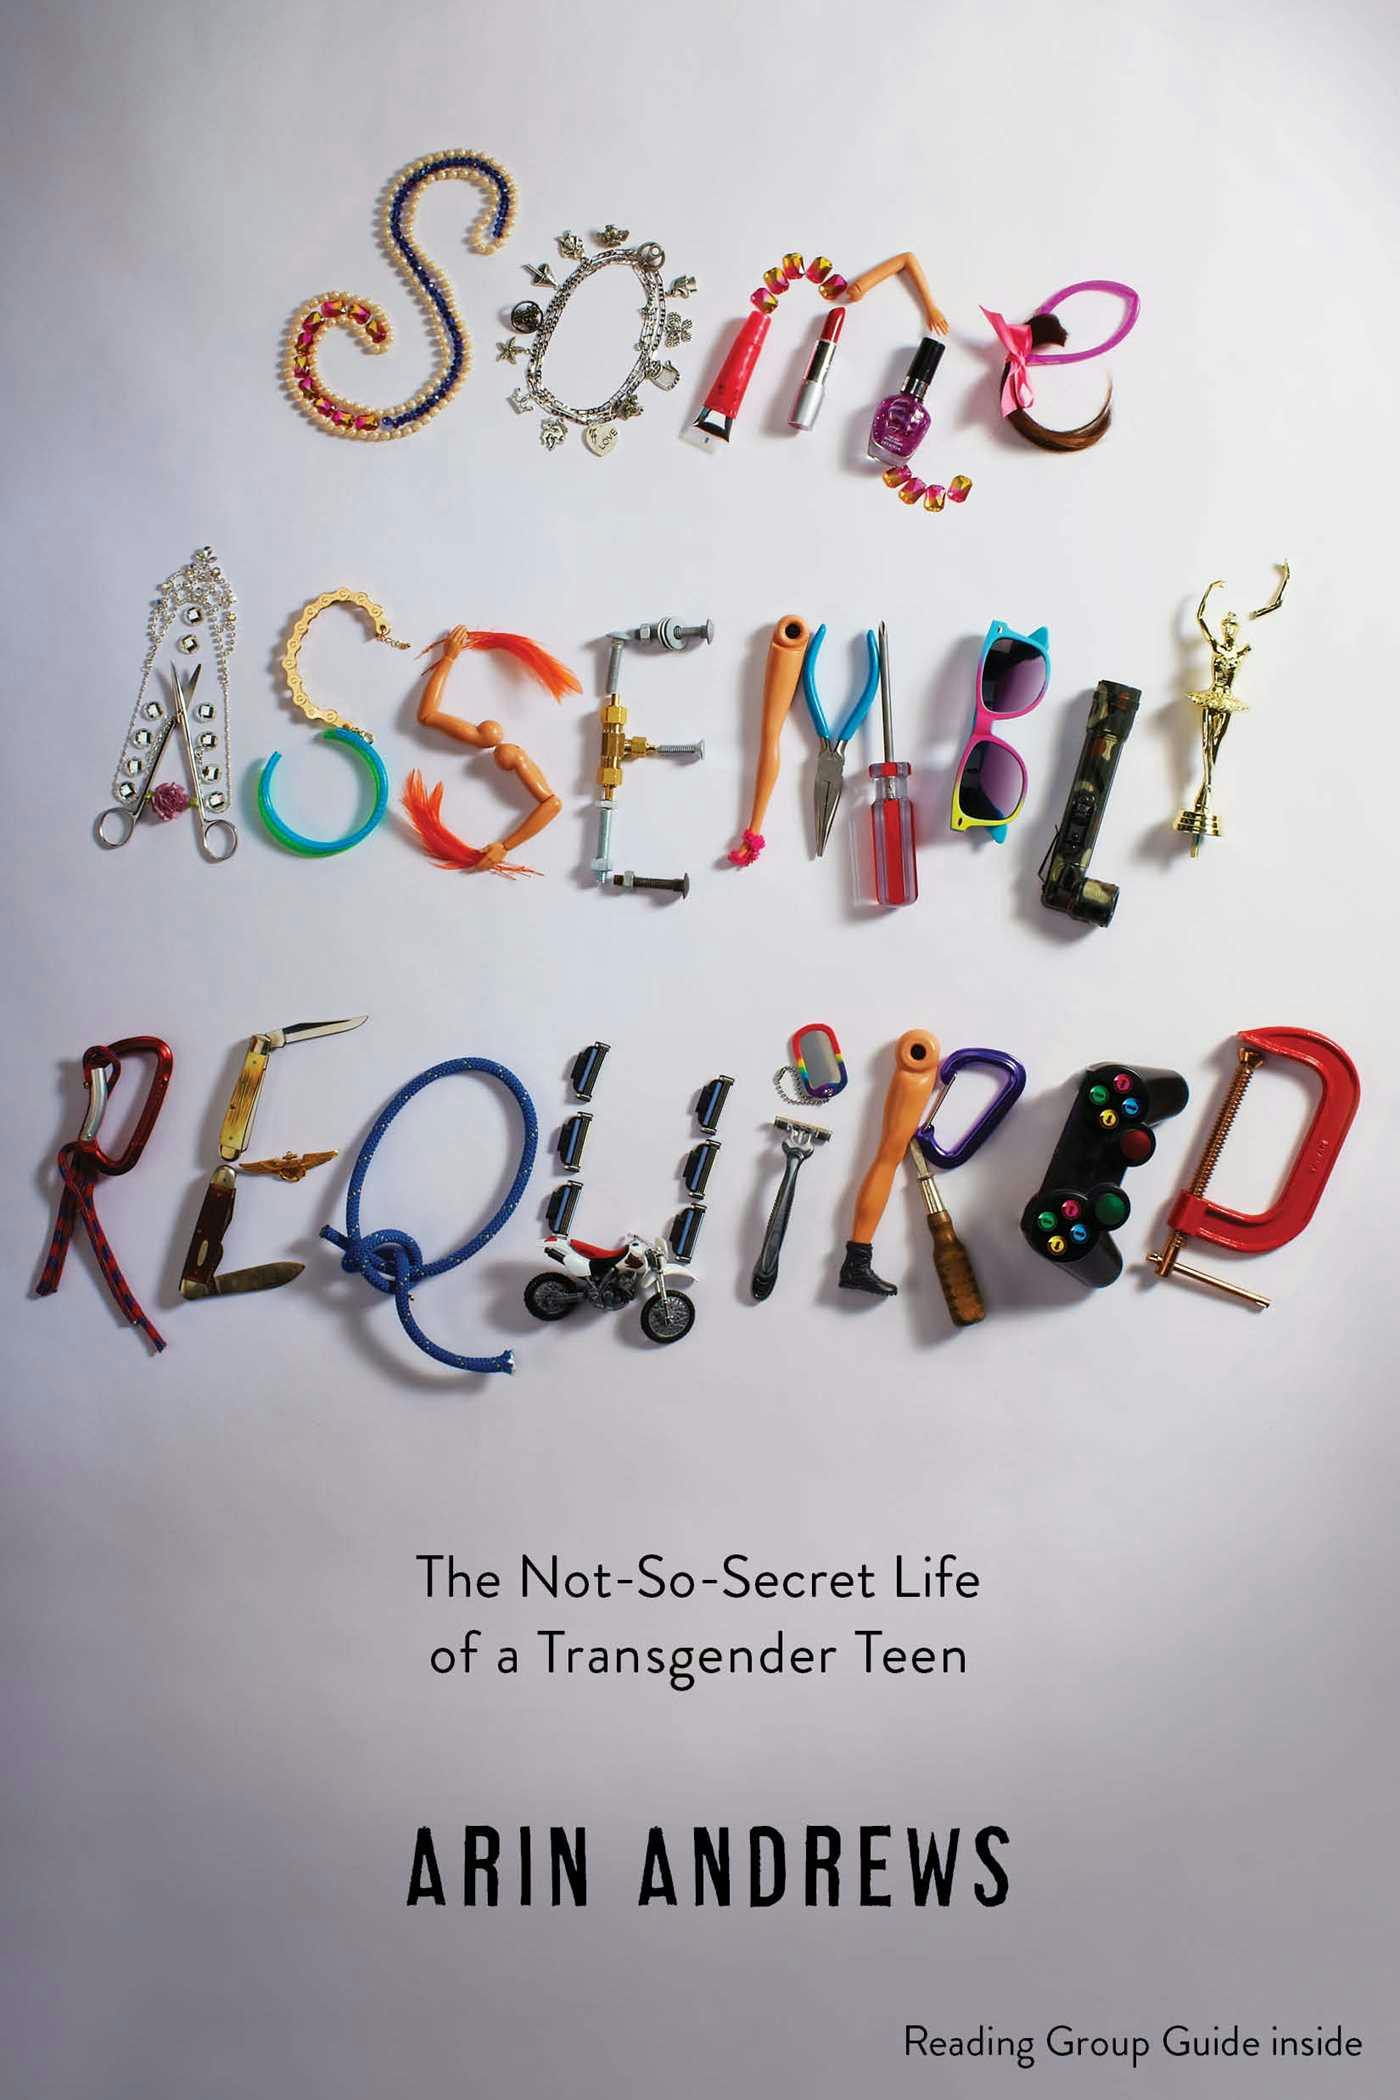 Some Assembly Required: The Not-So-Secret Life of a Transgender Teen - undefined